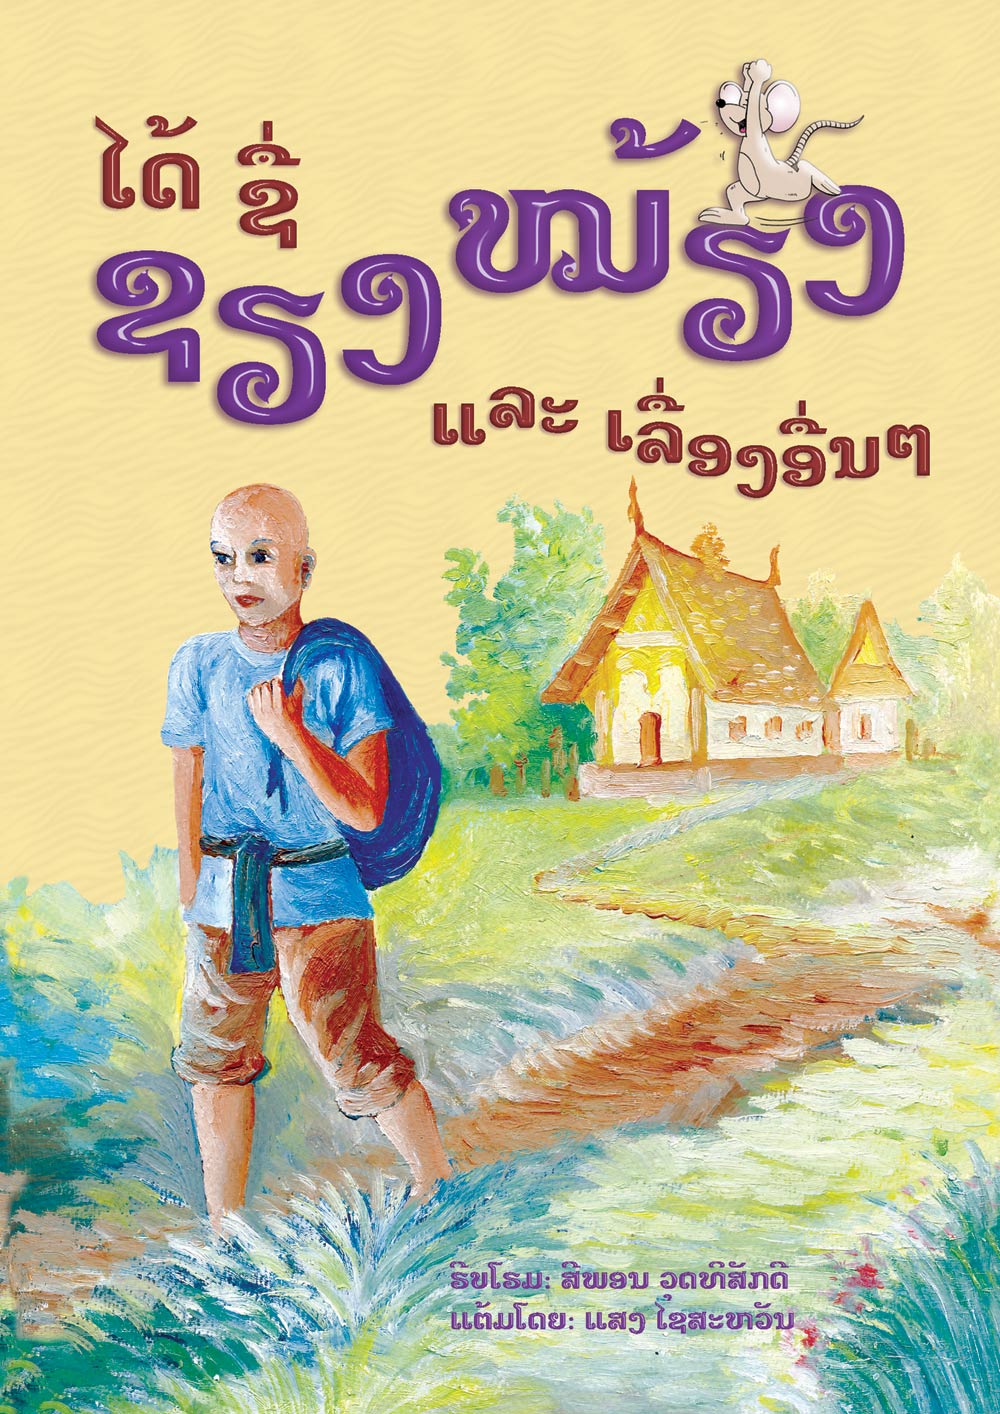 How Xieng Mieng Got His Name large book cover, published in Lao language